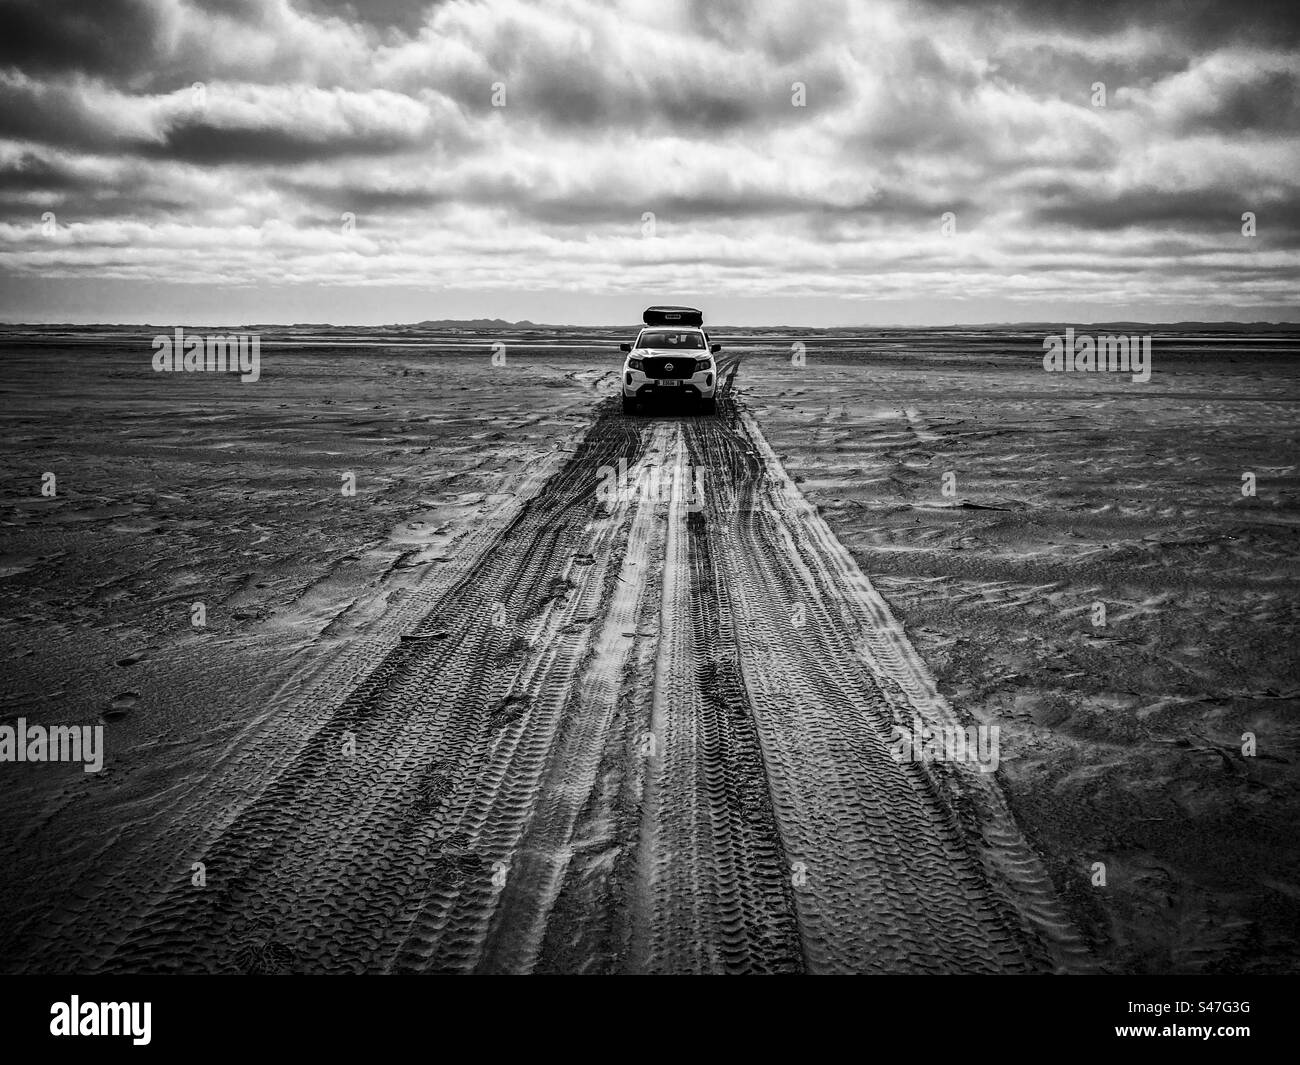 A 4x4 car drives on the sandy track in the Skeleton Coast in Namibia Stock Photo